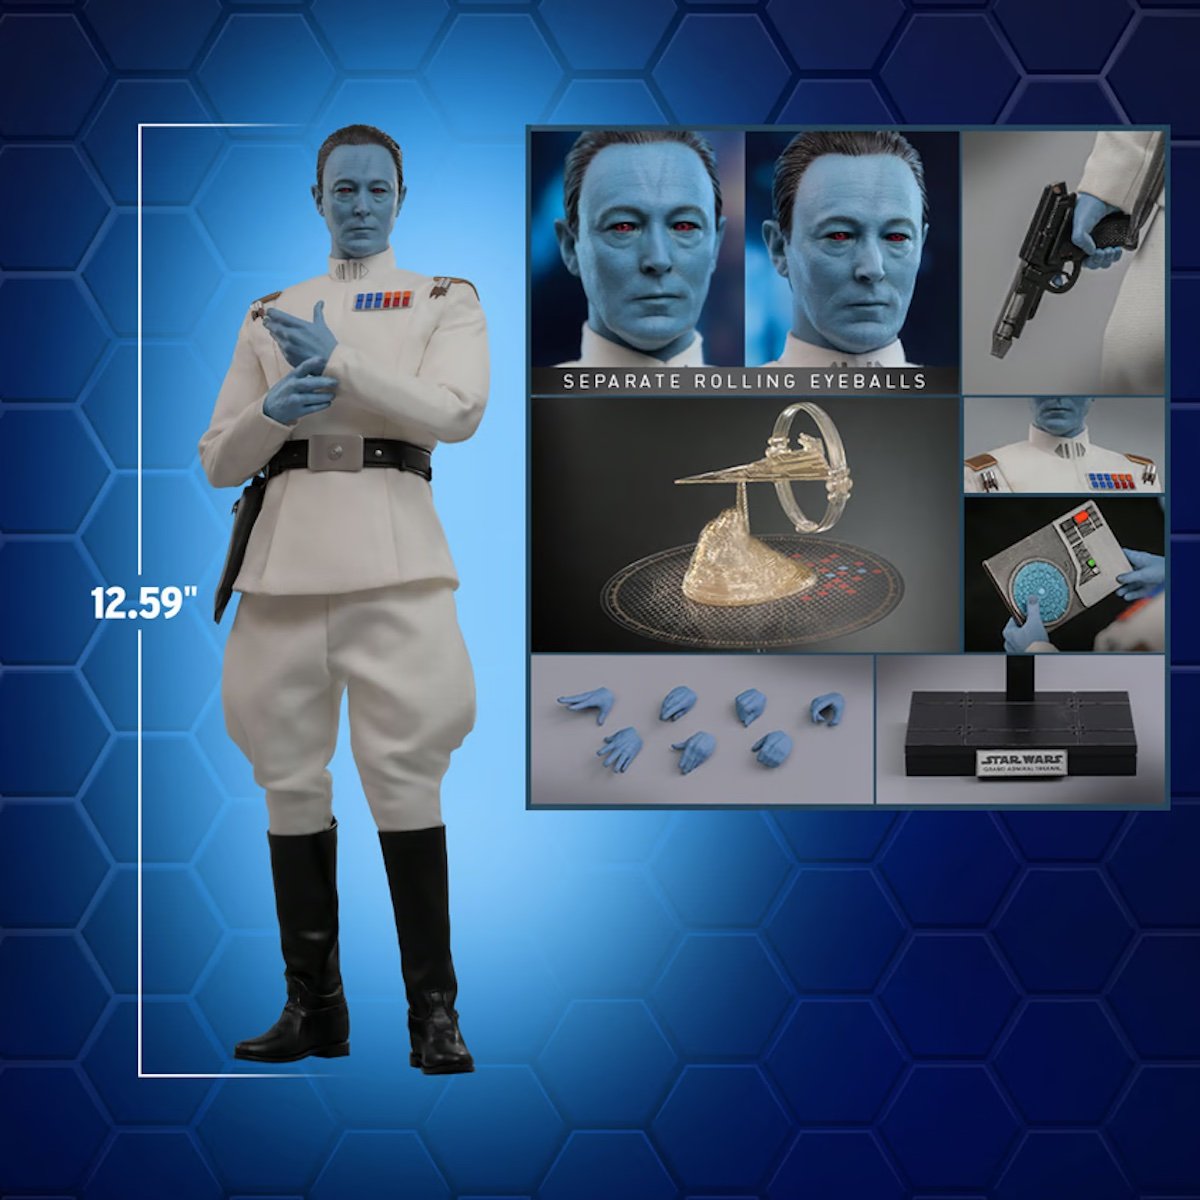 A display for Hot Toys' Grand Admiral Thrawn figure with inserts showing all of the extras that come with it